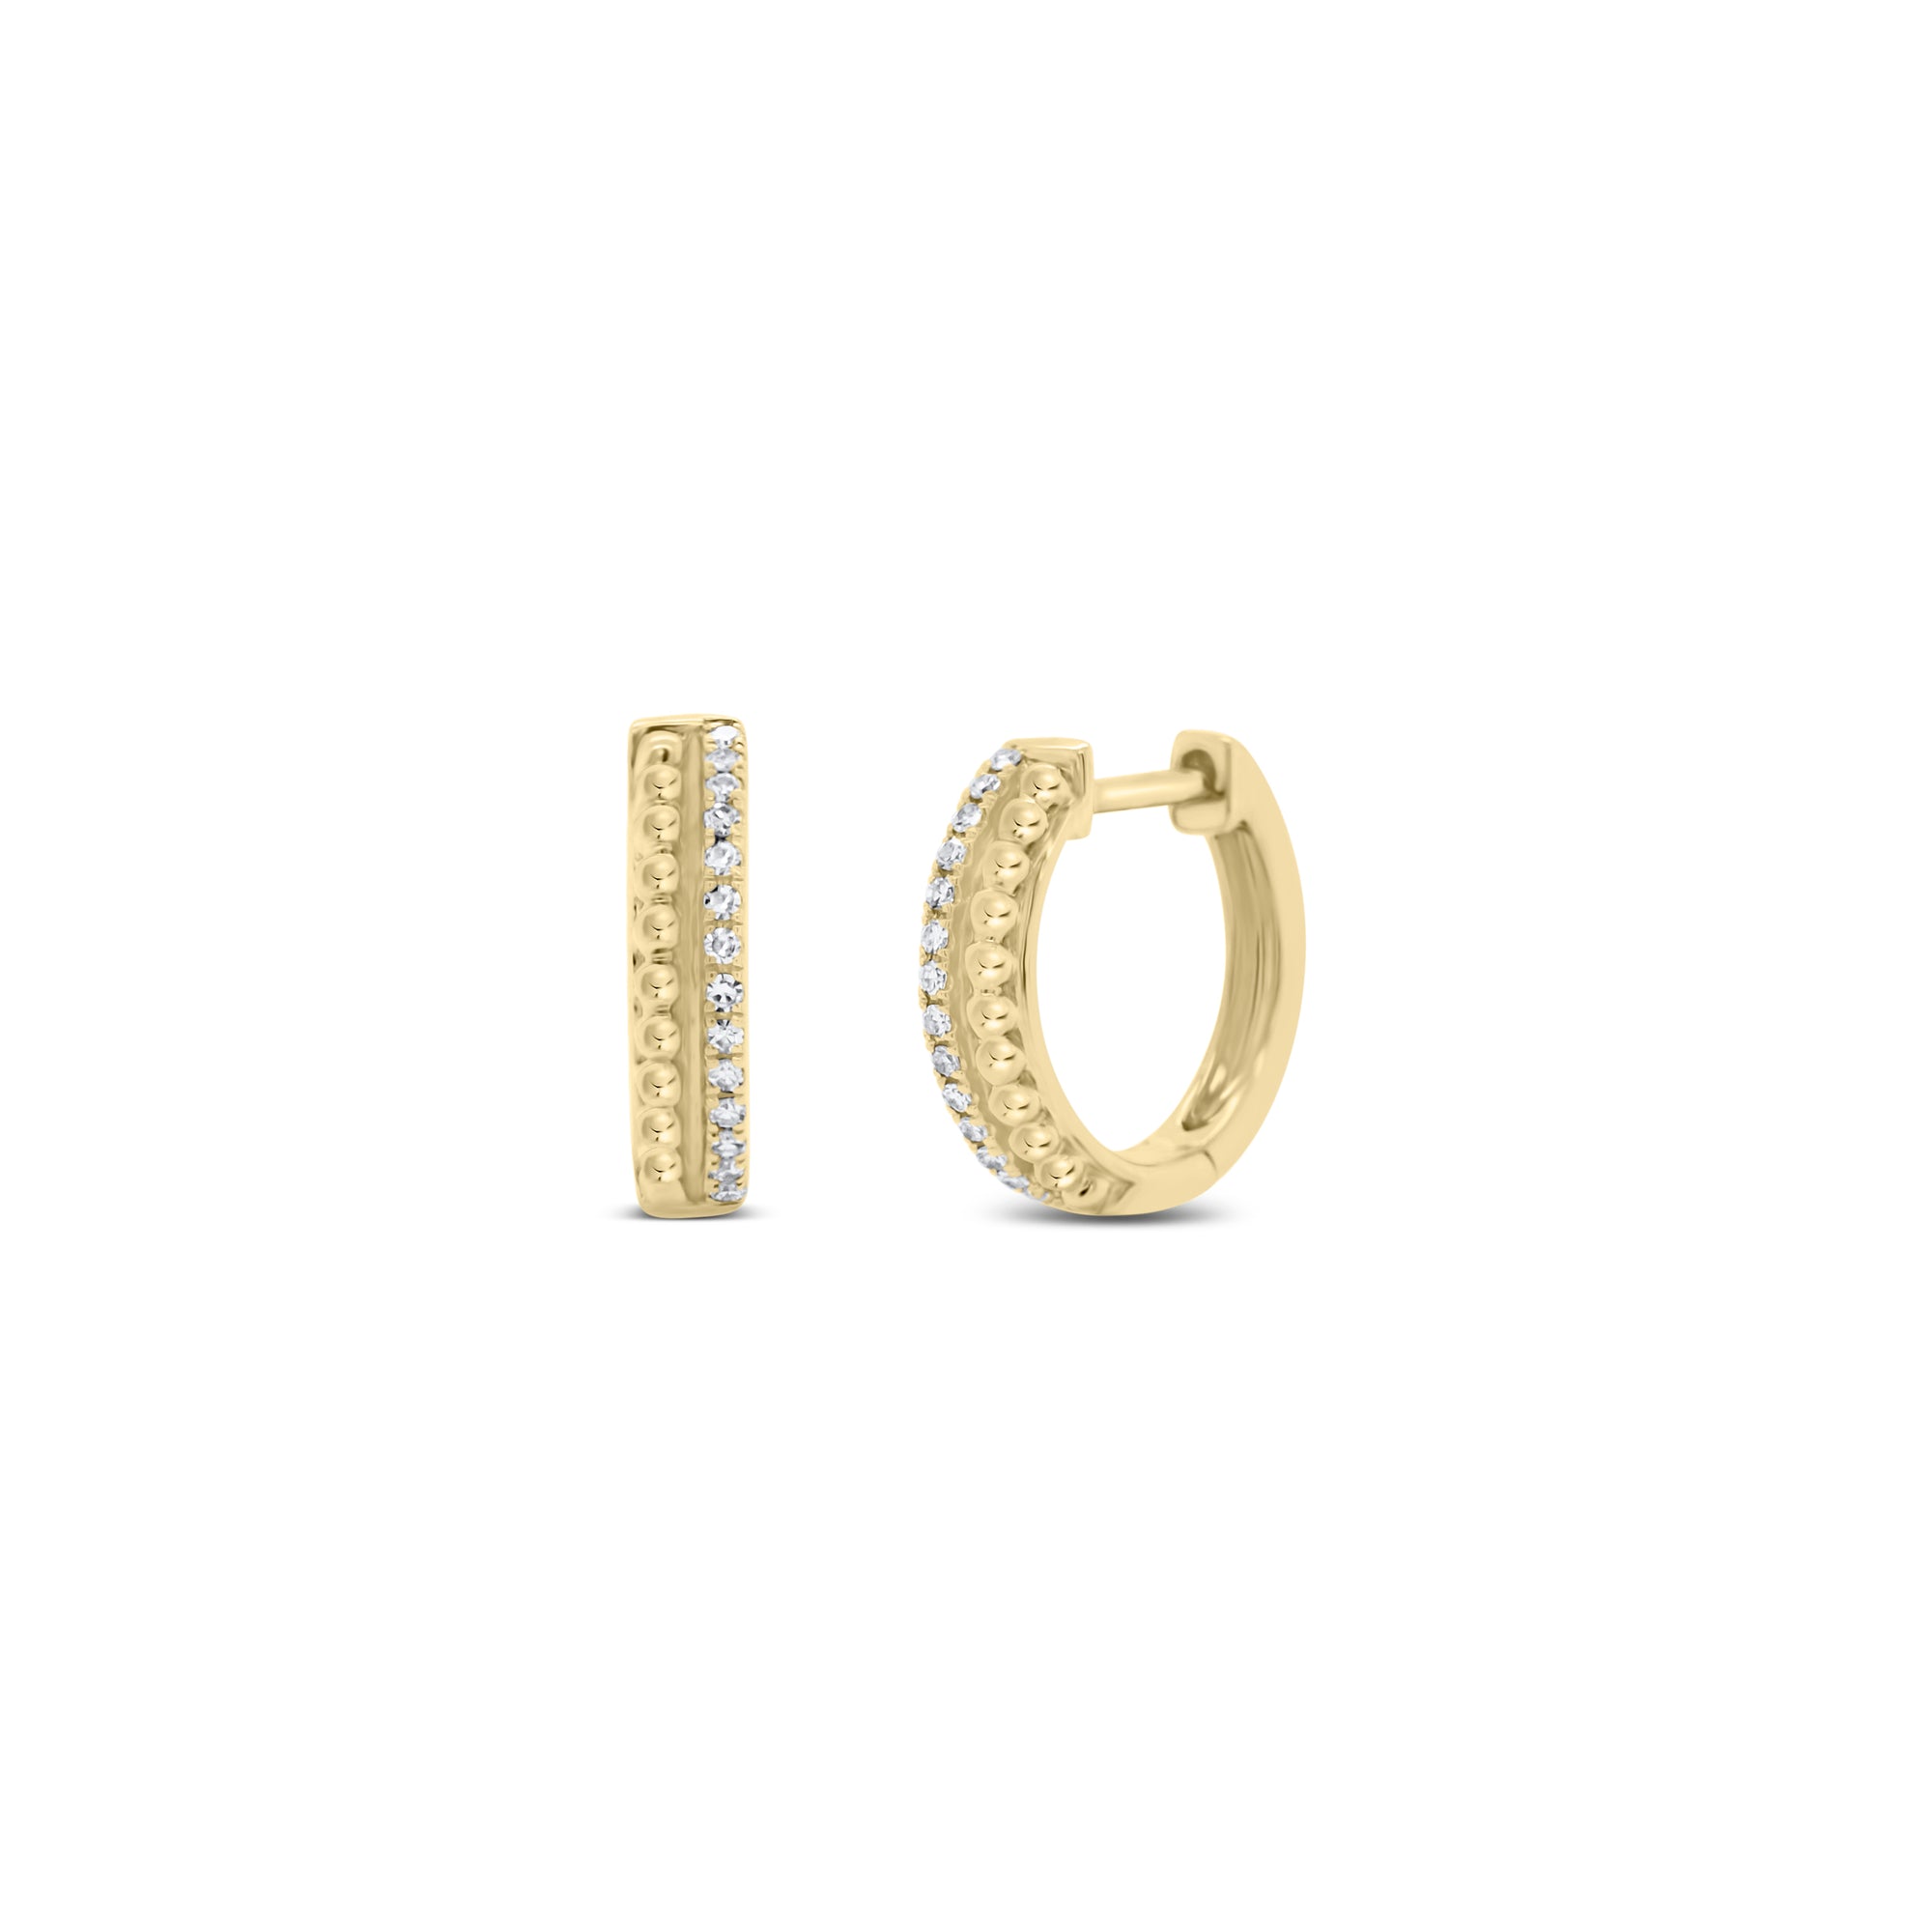 Diamond and Beaded Gold Huggie Earrings - 14K gold weighing 2.06 grams  - 28 round diamonds totaling 0.07 carats